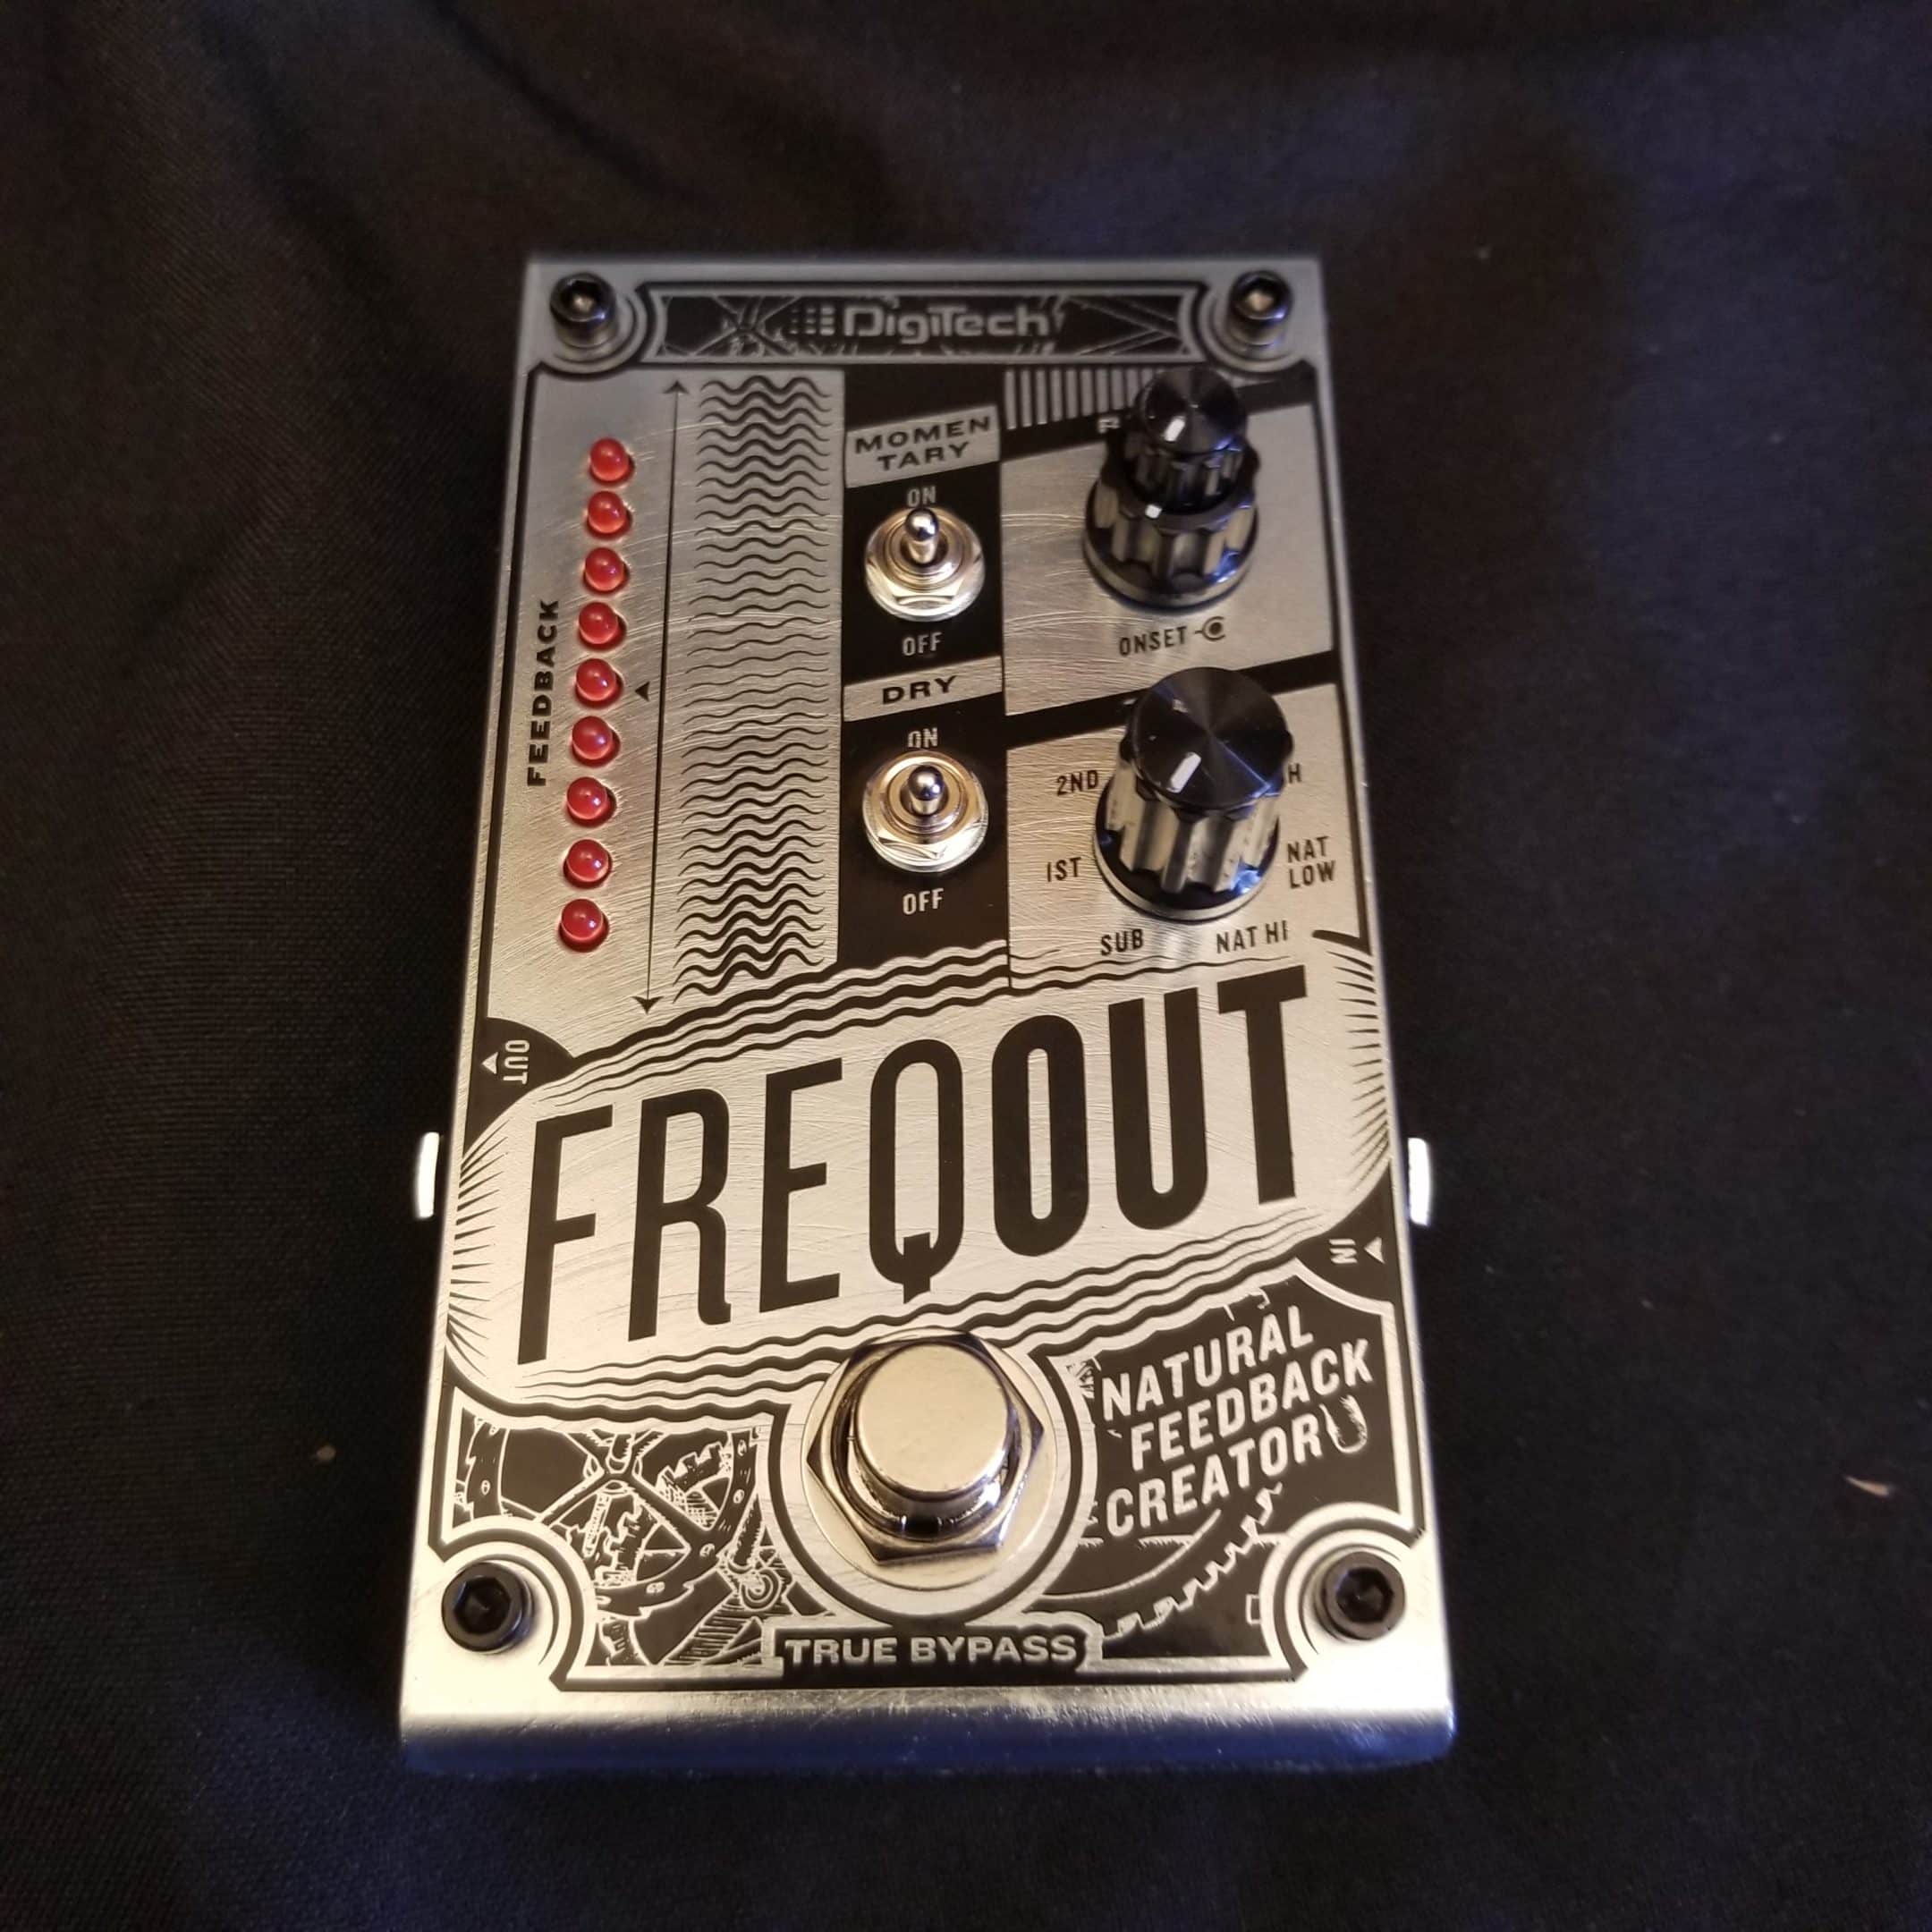 NEW DigiTech FreqOut Natural Feedback Creator Guitar Effects FX Pedal  Stompbox